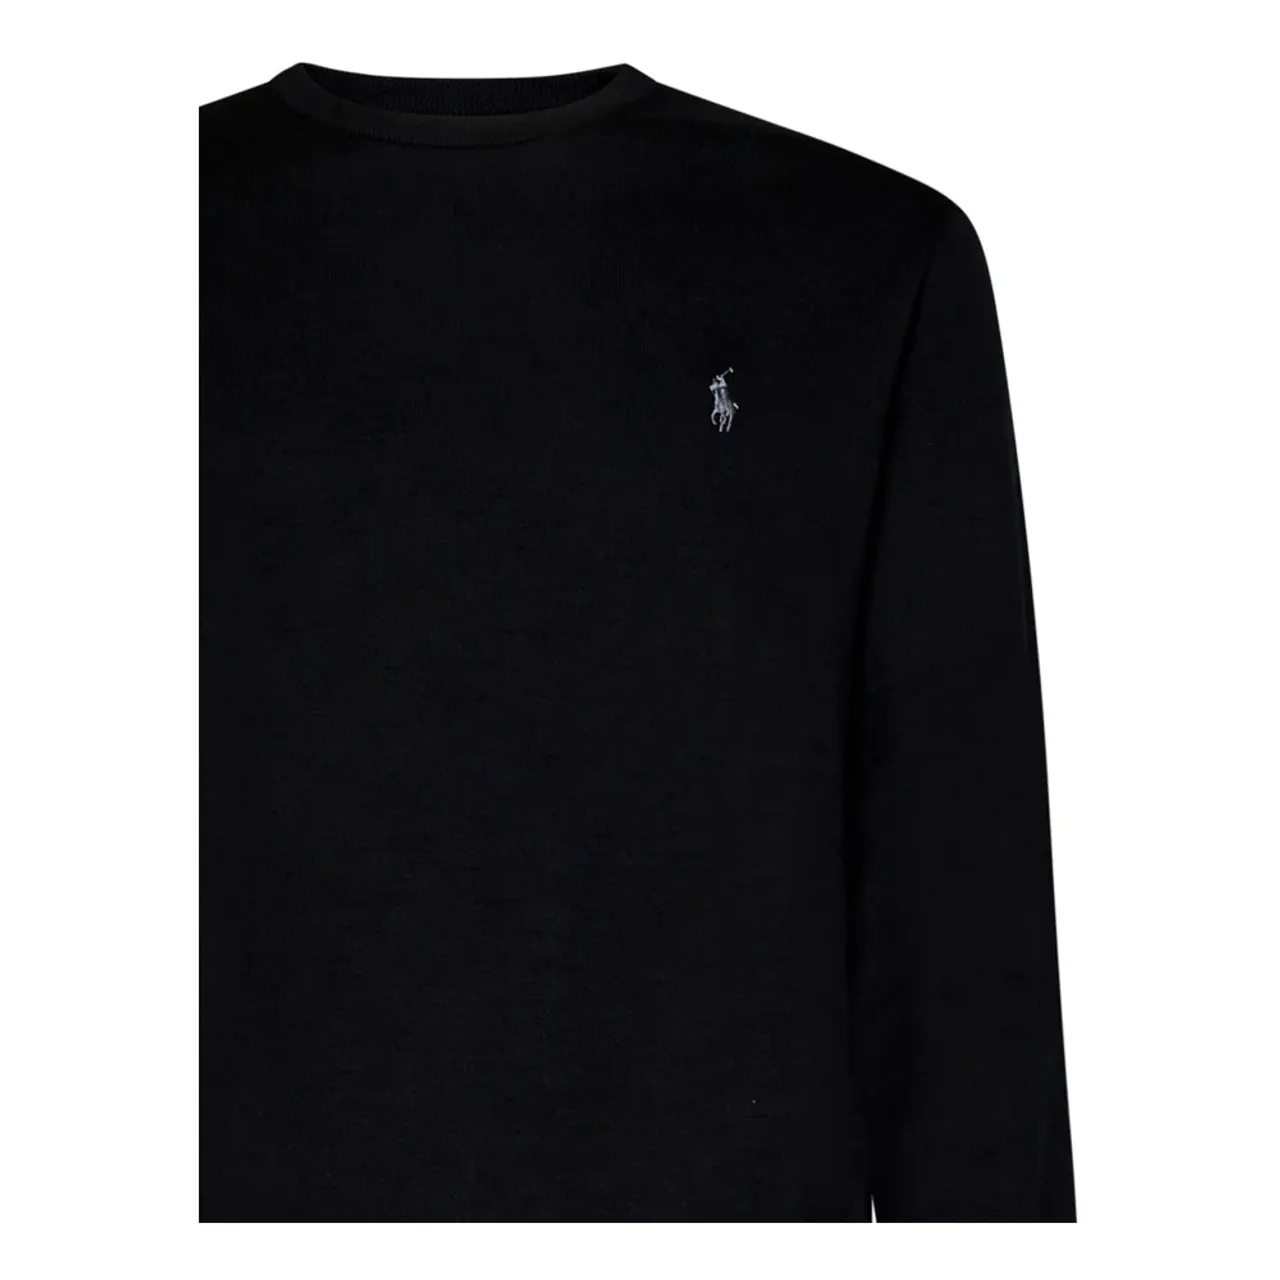 Polo Ralph Lauren , Classic Black Cotton Sweater with Embroidered Pony ,Black male, Sizes: